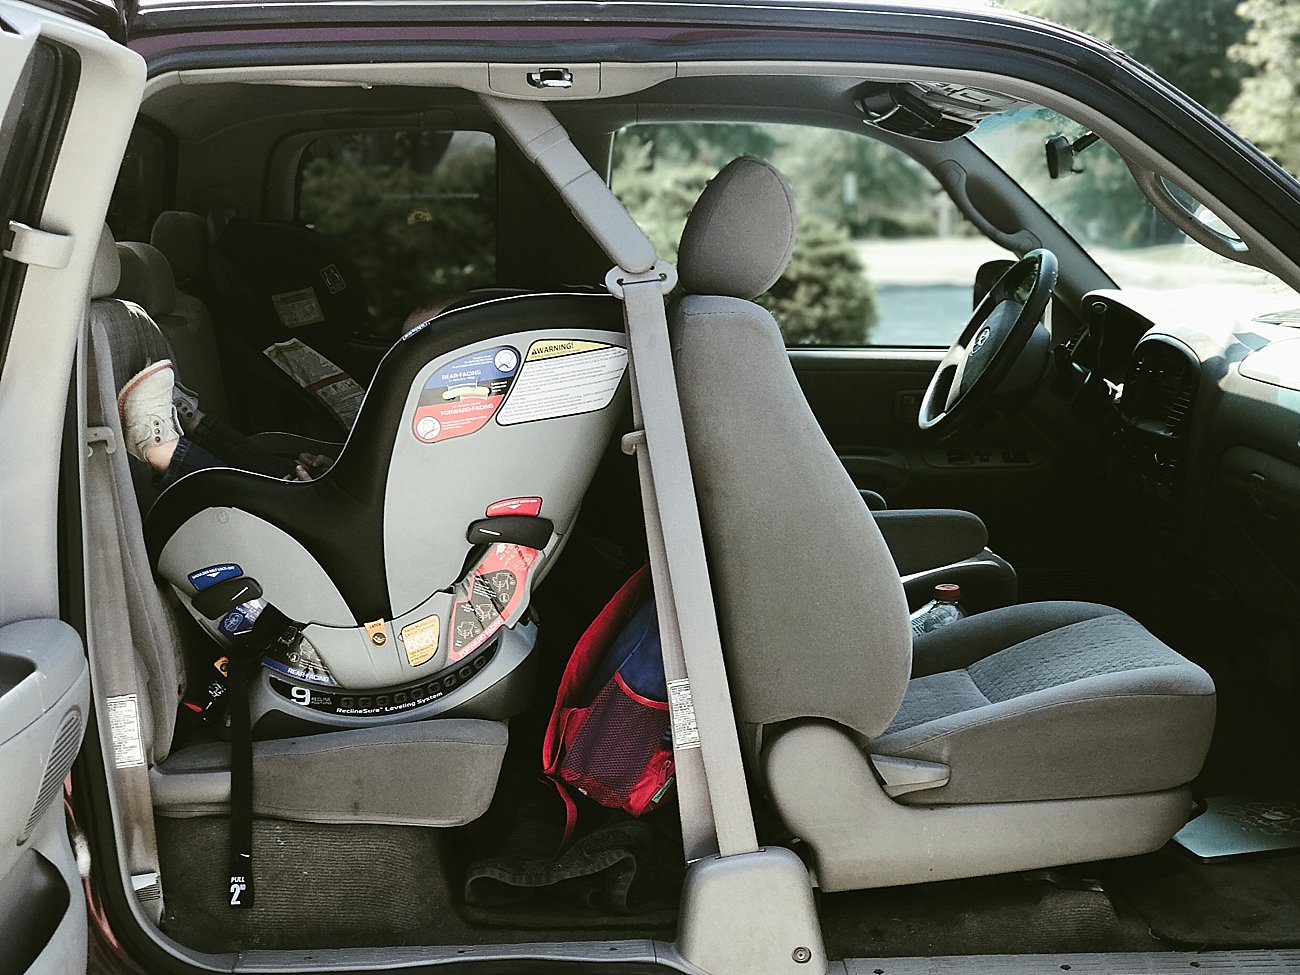 Chicco NextFit® iX - TurnAfter2 Campaign - Best rear facing convertible car seat that can fit in a pickup truck (7) - Why I Am Passionate About Extended Rear Facing (& Chicco Fit2 Giveaway!) by North Carolina mom blogger Still Being Molly